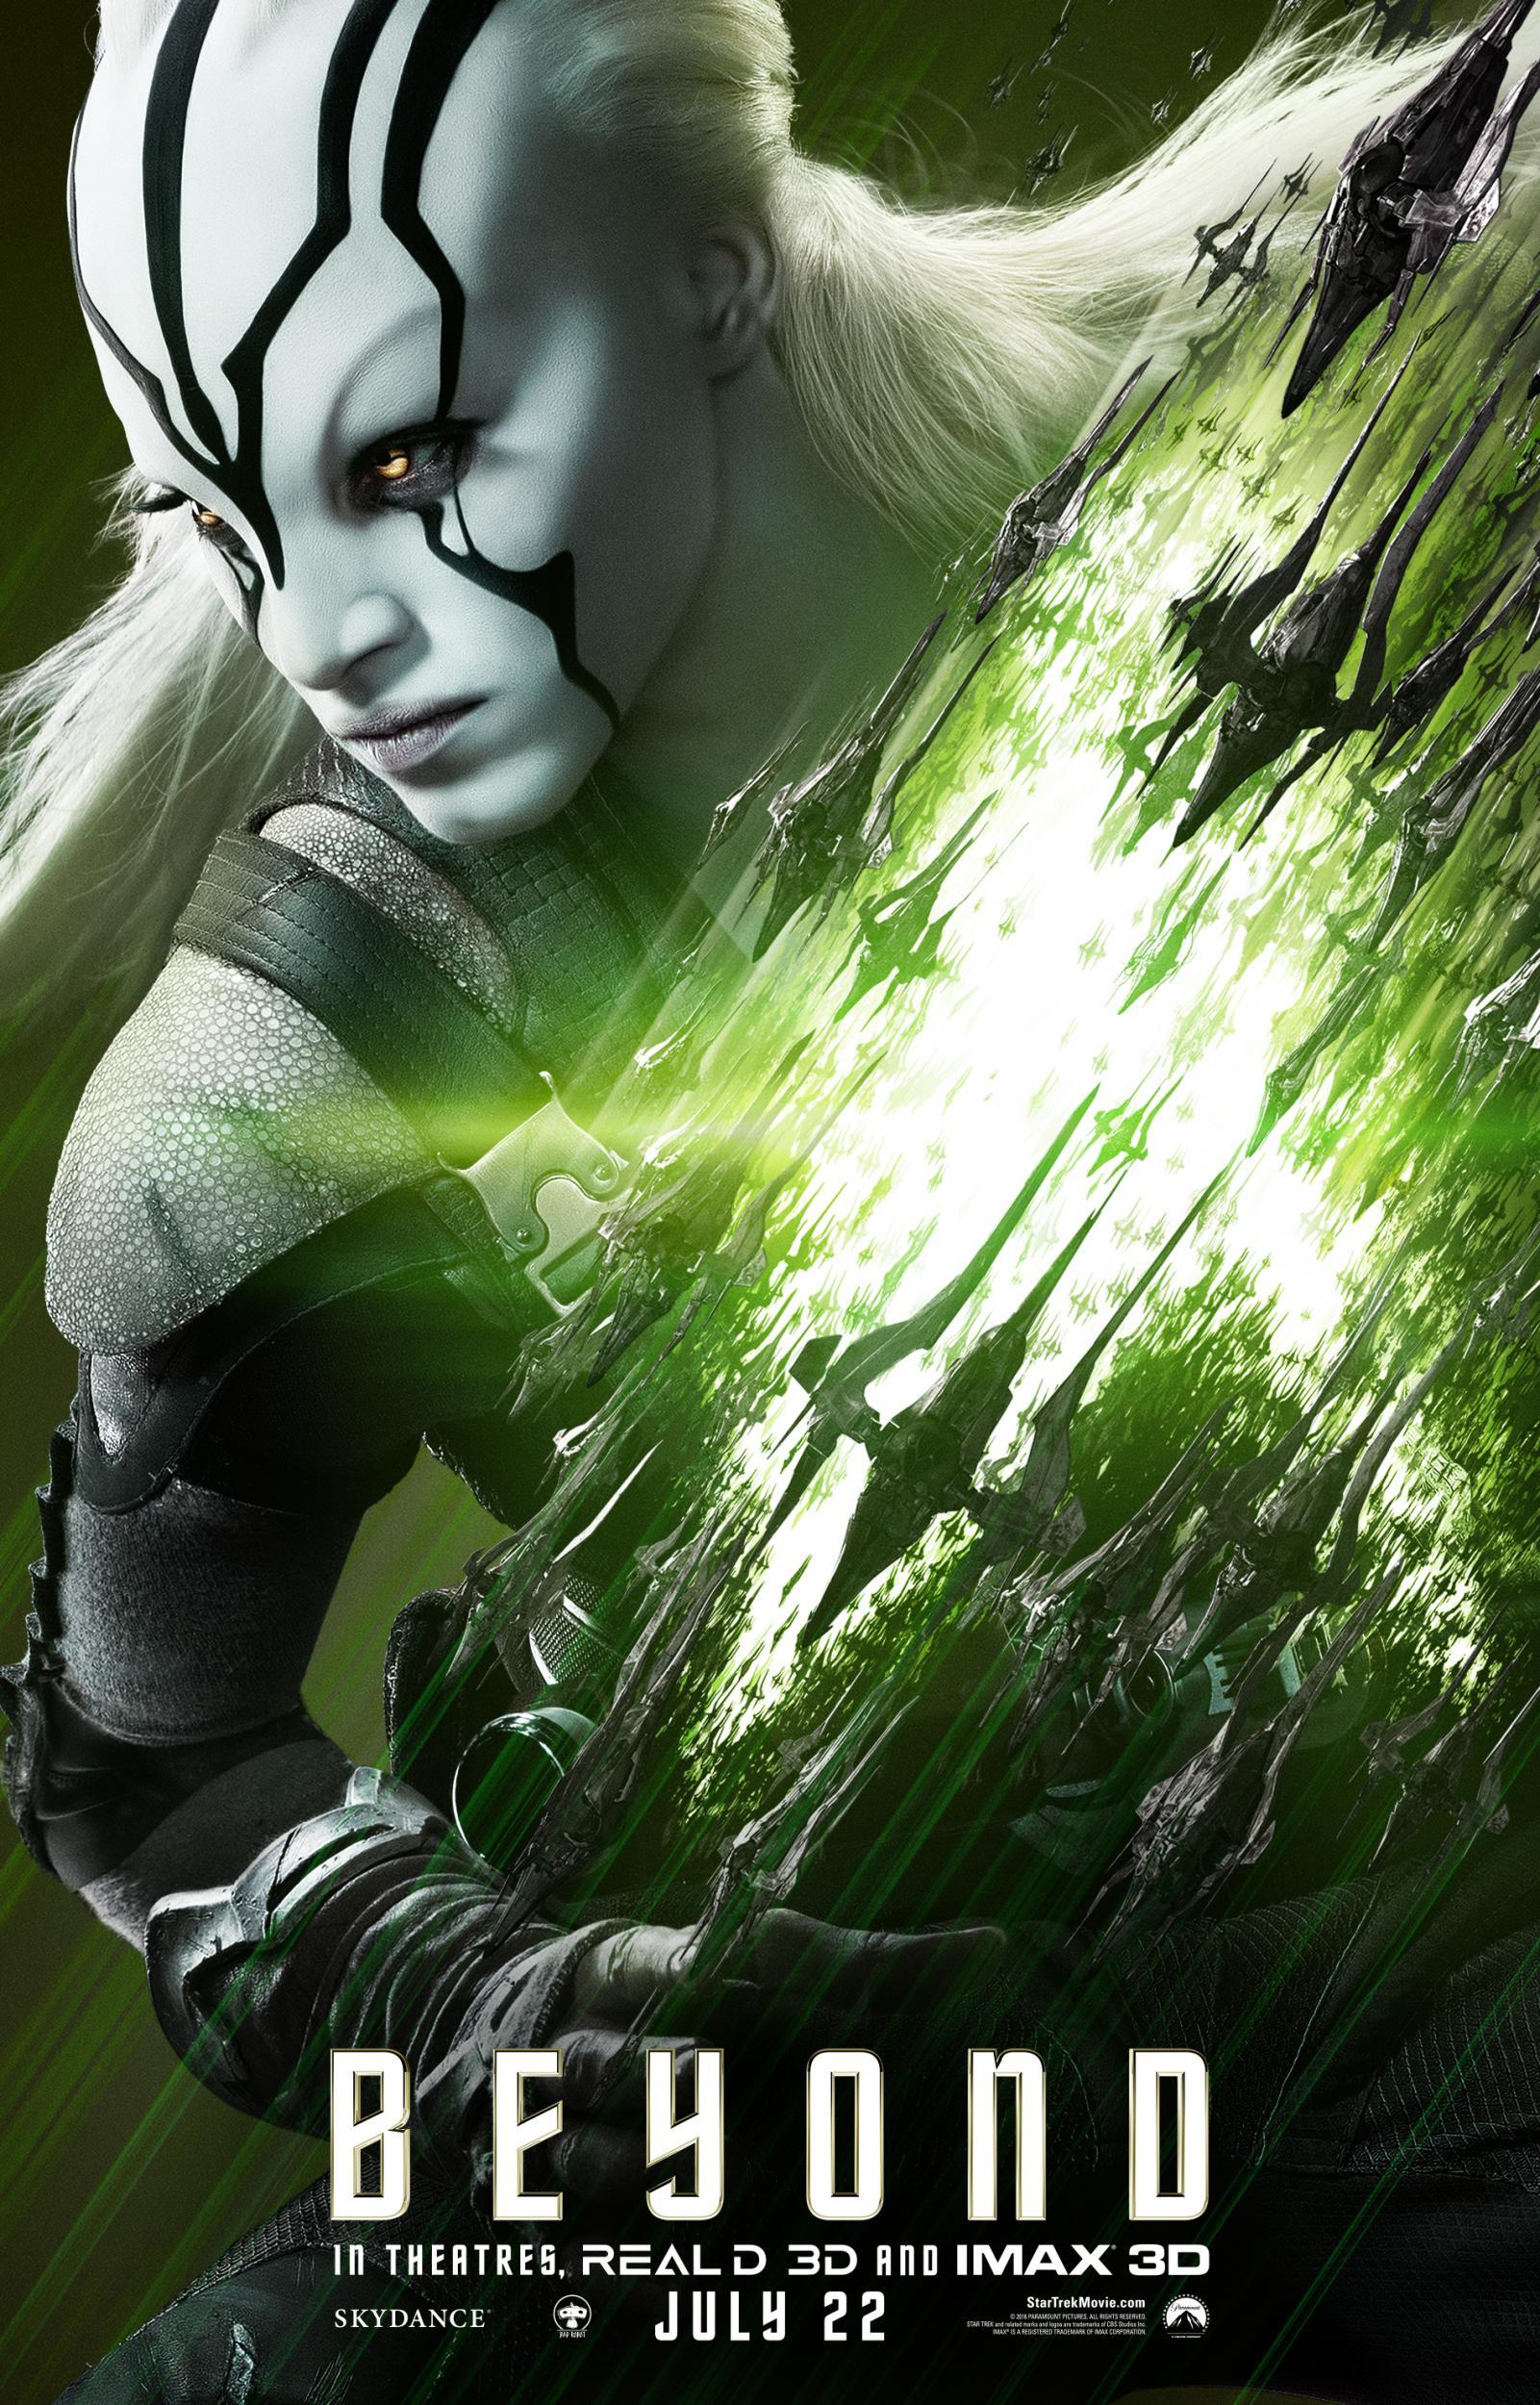 &#13;
Jaylah features on the Star Trek Beyond poster&#13;